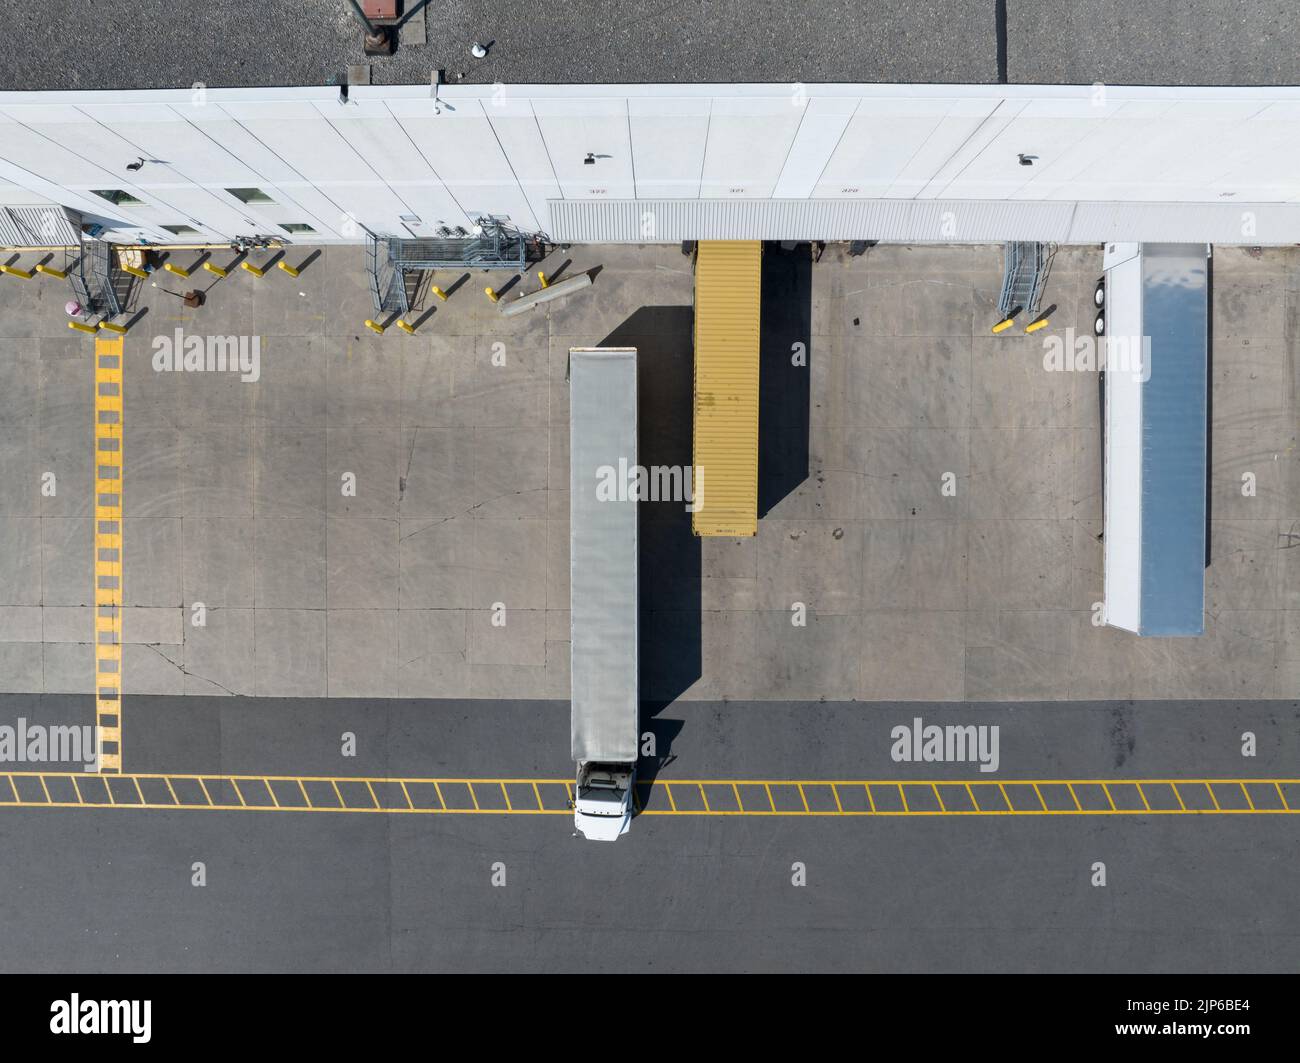 A direct top-down aerial view above a semi-truck, tractor trailer being parked at a large warehouse; other trailers are seen at loading docks. Stock Photo